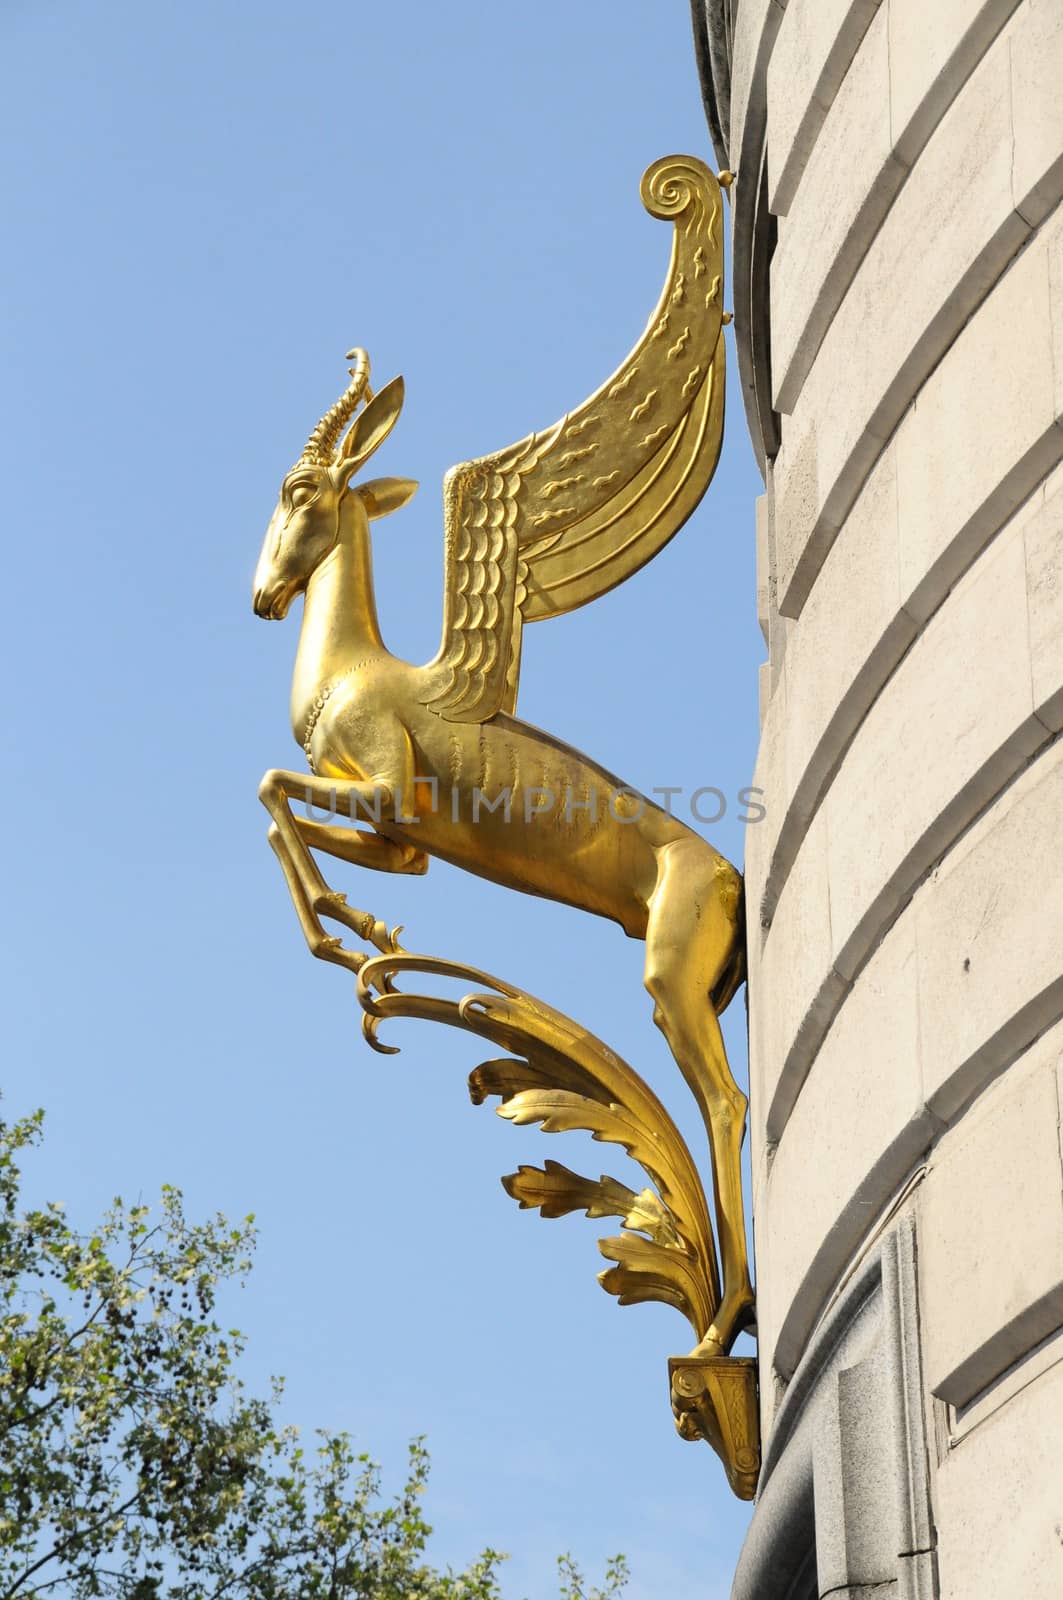 Golden springbok on wall of South Africa house







Lomndon,Trafalgar Square,Soth Africa house,springbok.gold ,golden colour,wings,winged,republic,Capetown.Johannesburg,London office,head office,embassy,representatives,South African